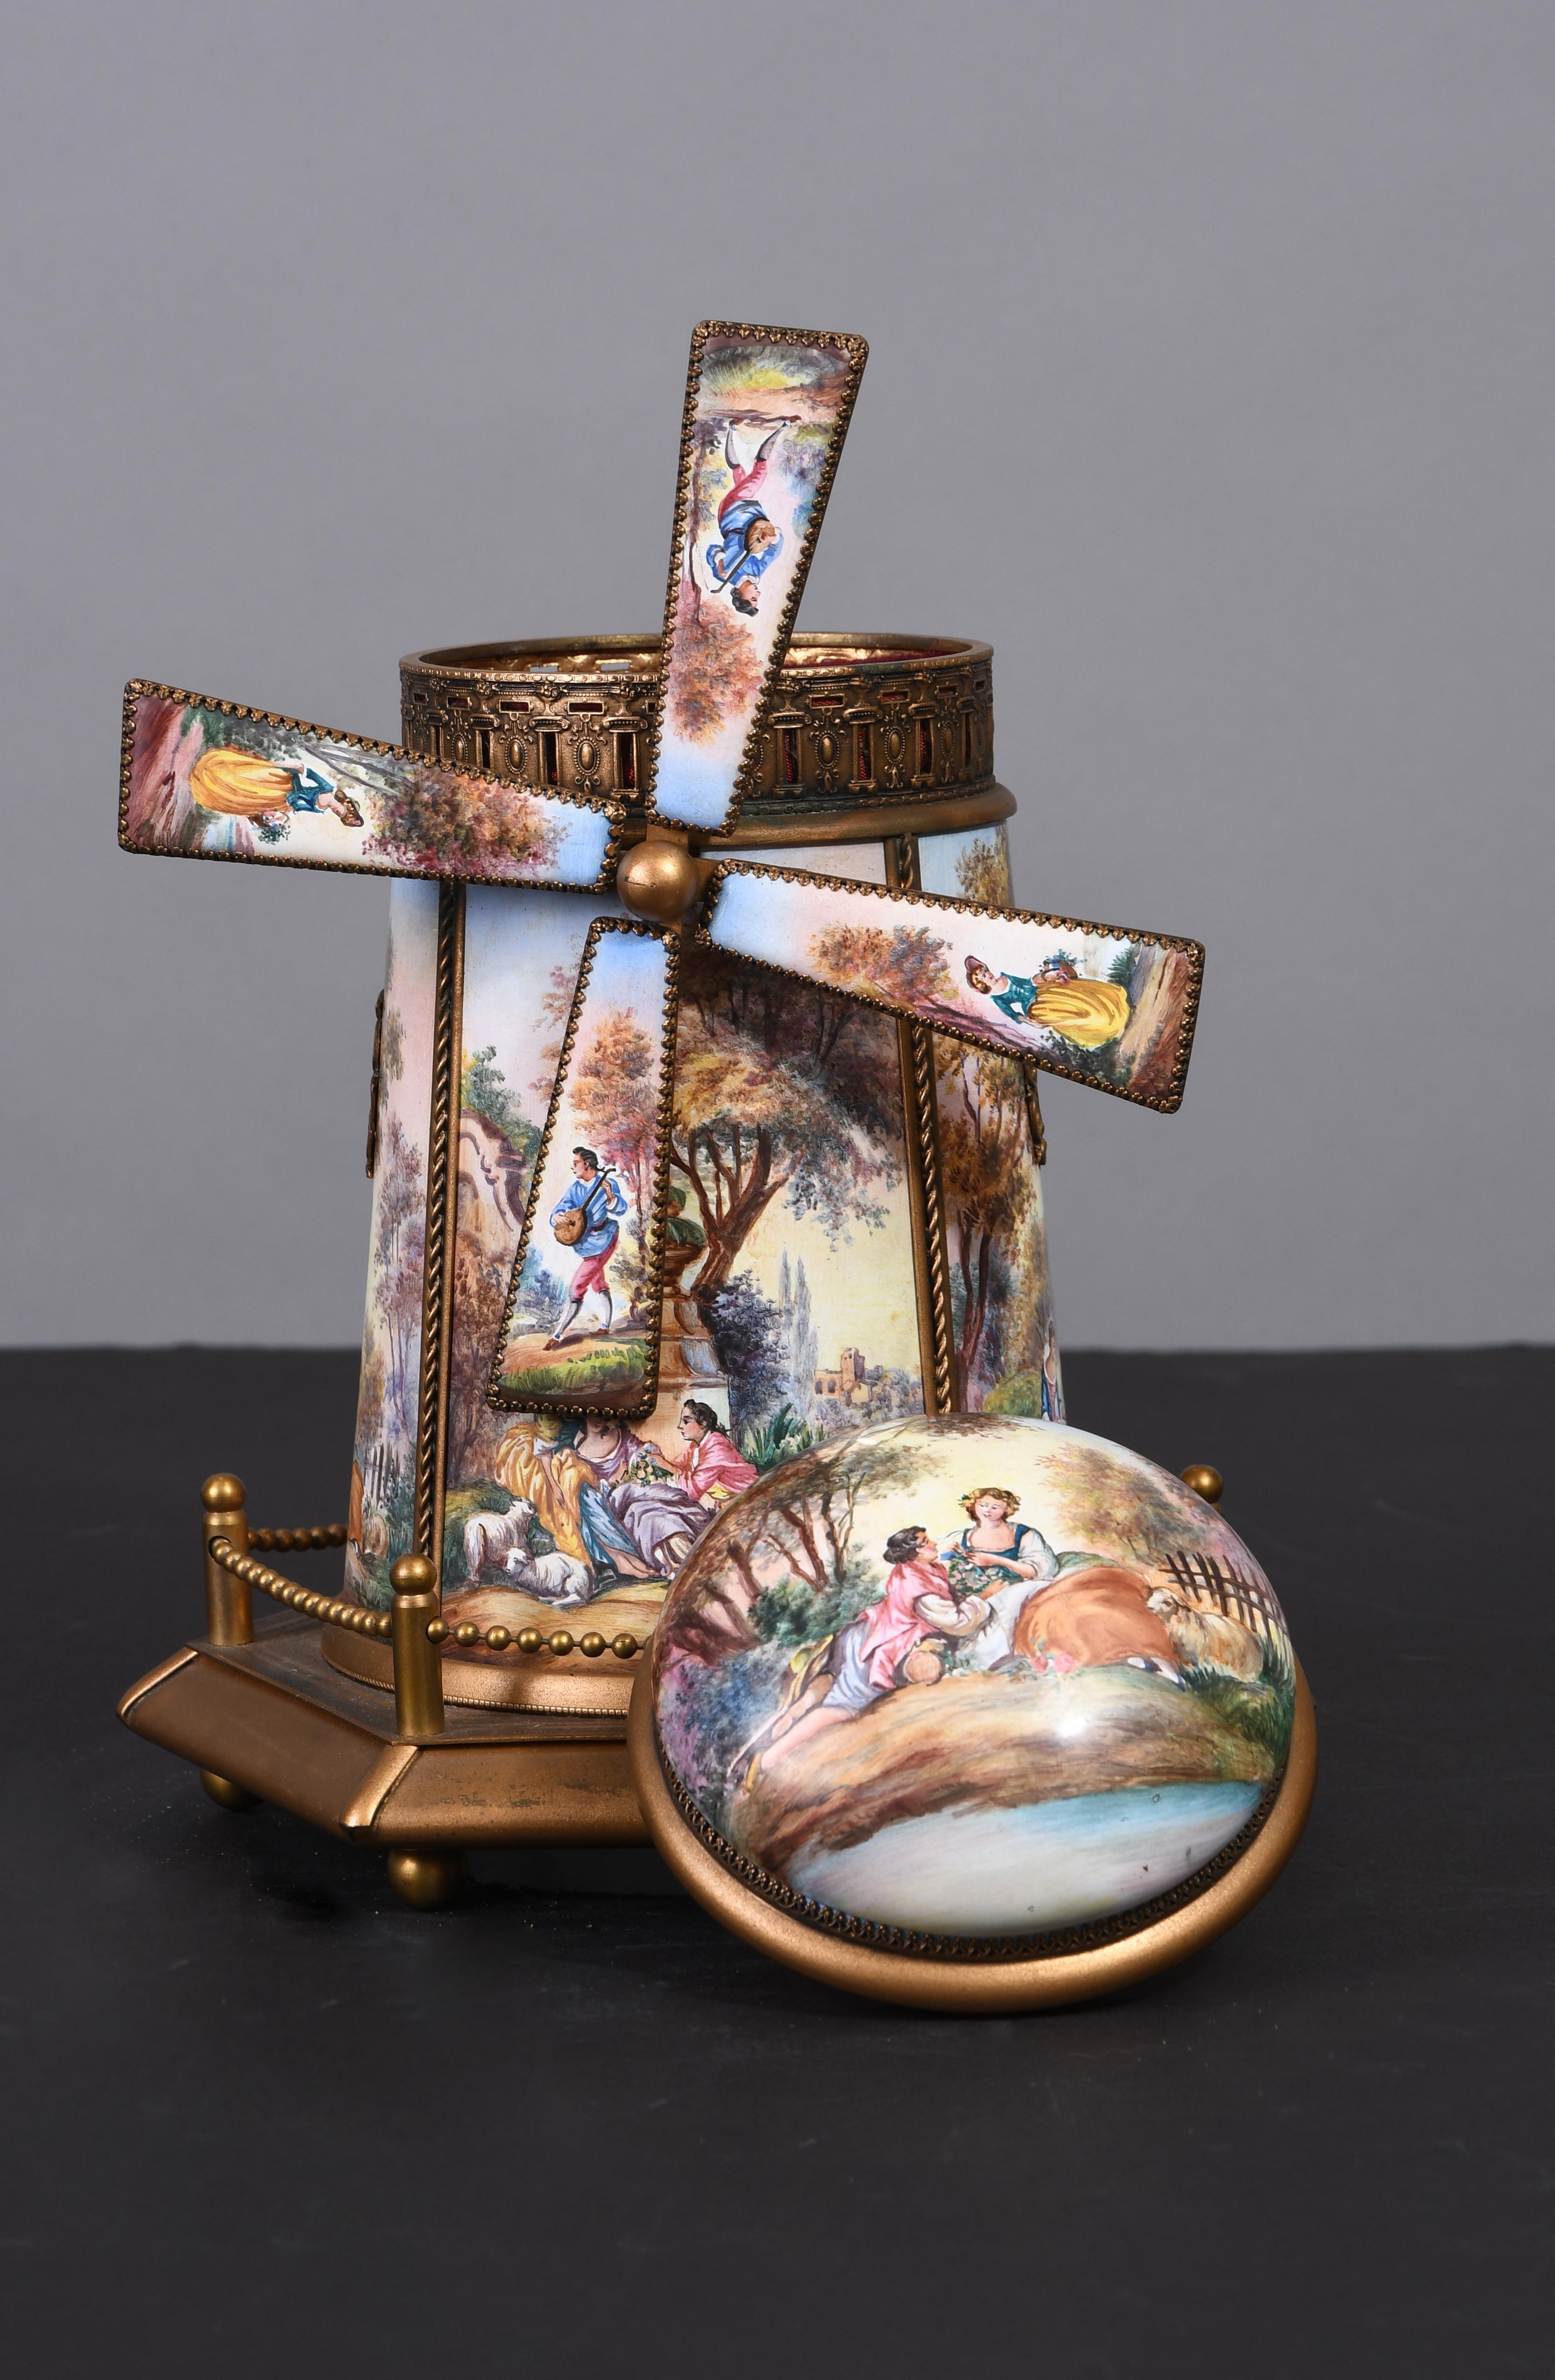 This windmill music box depicts different hand painted enamel panels of romantic courting couples in a medieval pastoral landscape. The windmill blades are adorned with shamrock prongs and show a gentleman playing the mandolin and a lady holding a